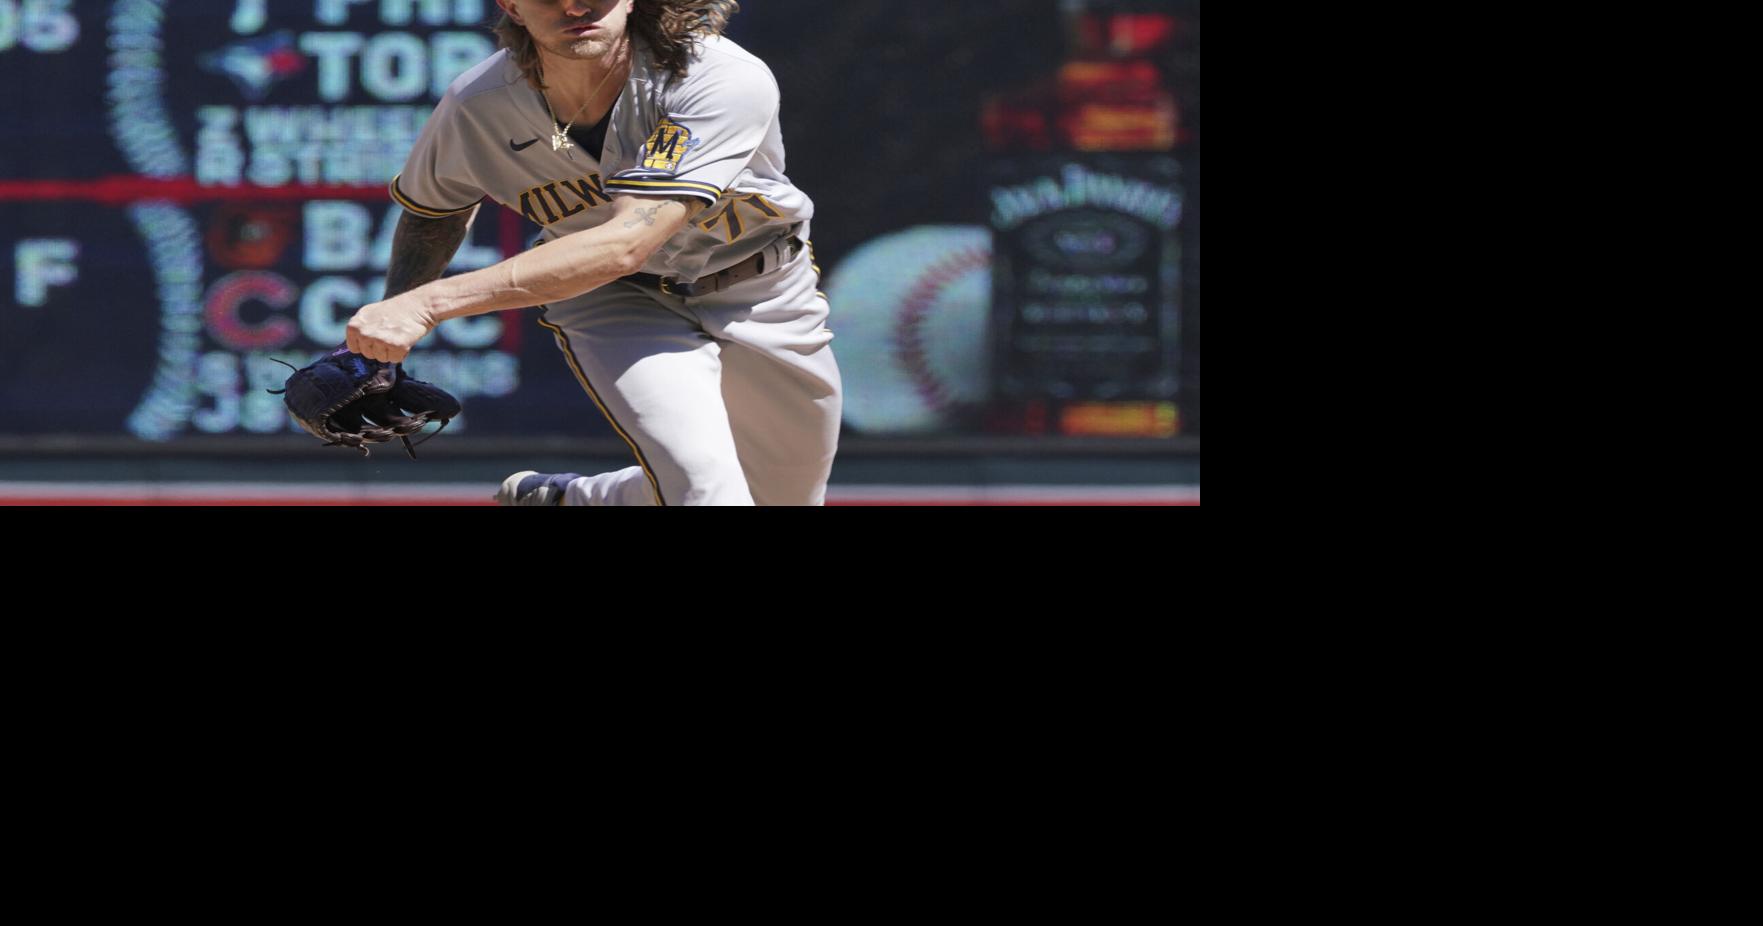 Brewers trade Josh Hader for Taylor Rogers, Dinelson Lamet, 2 prospects